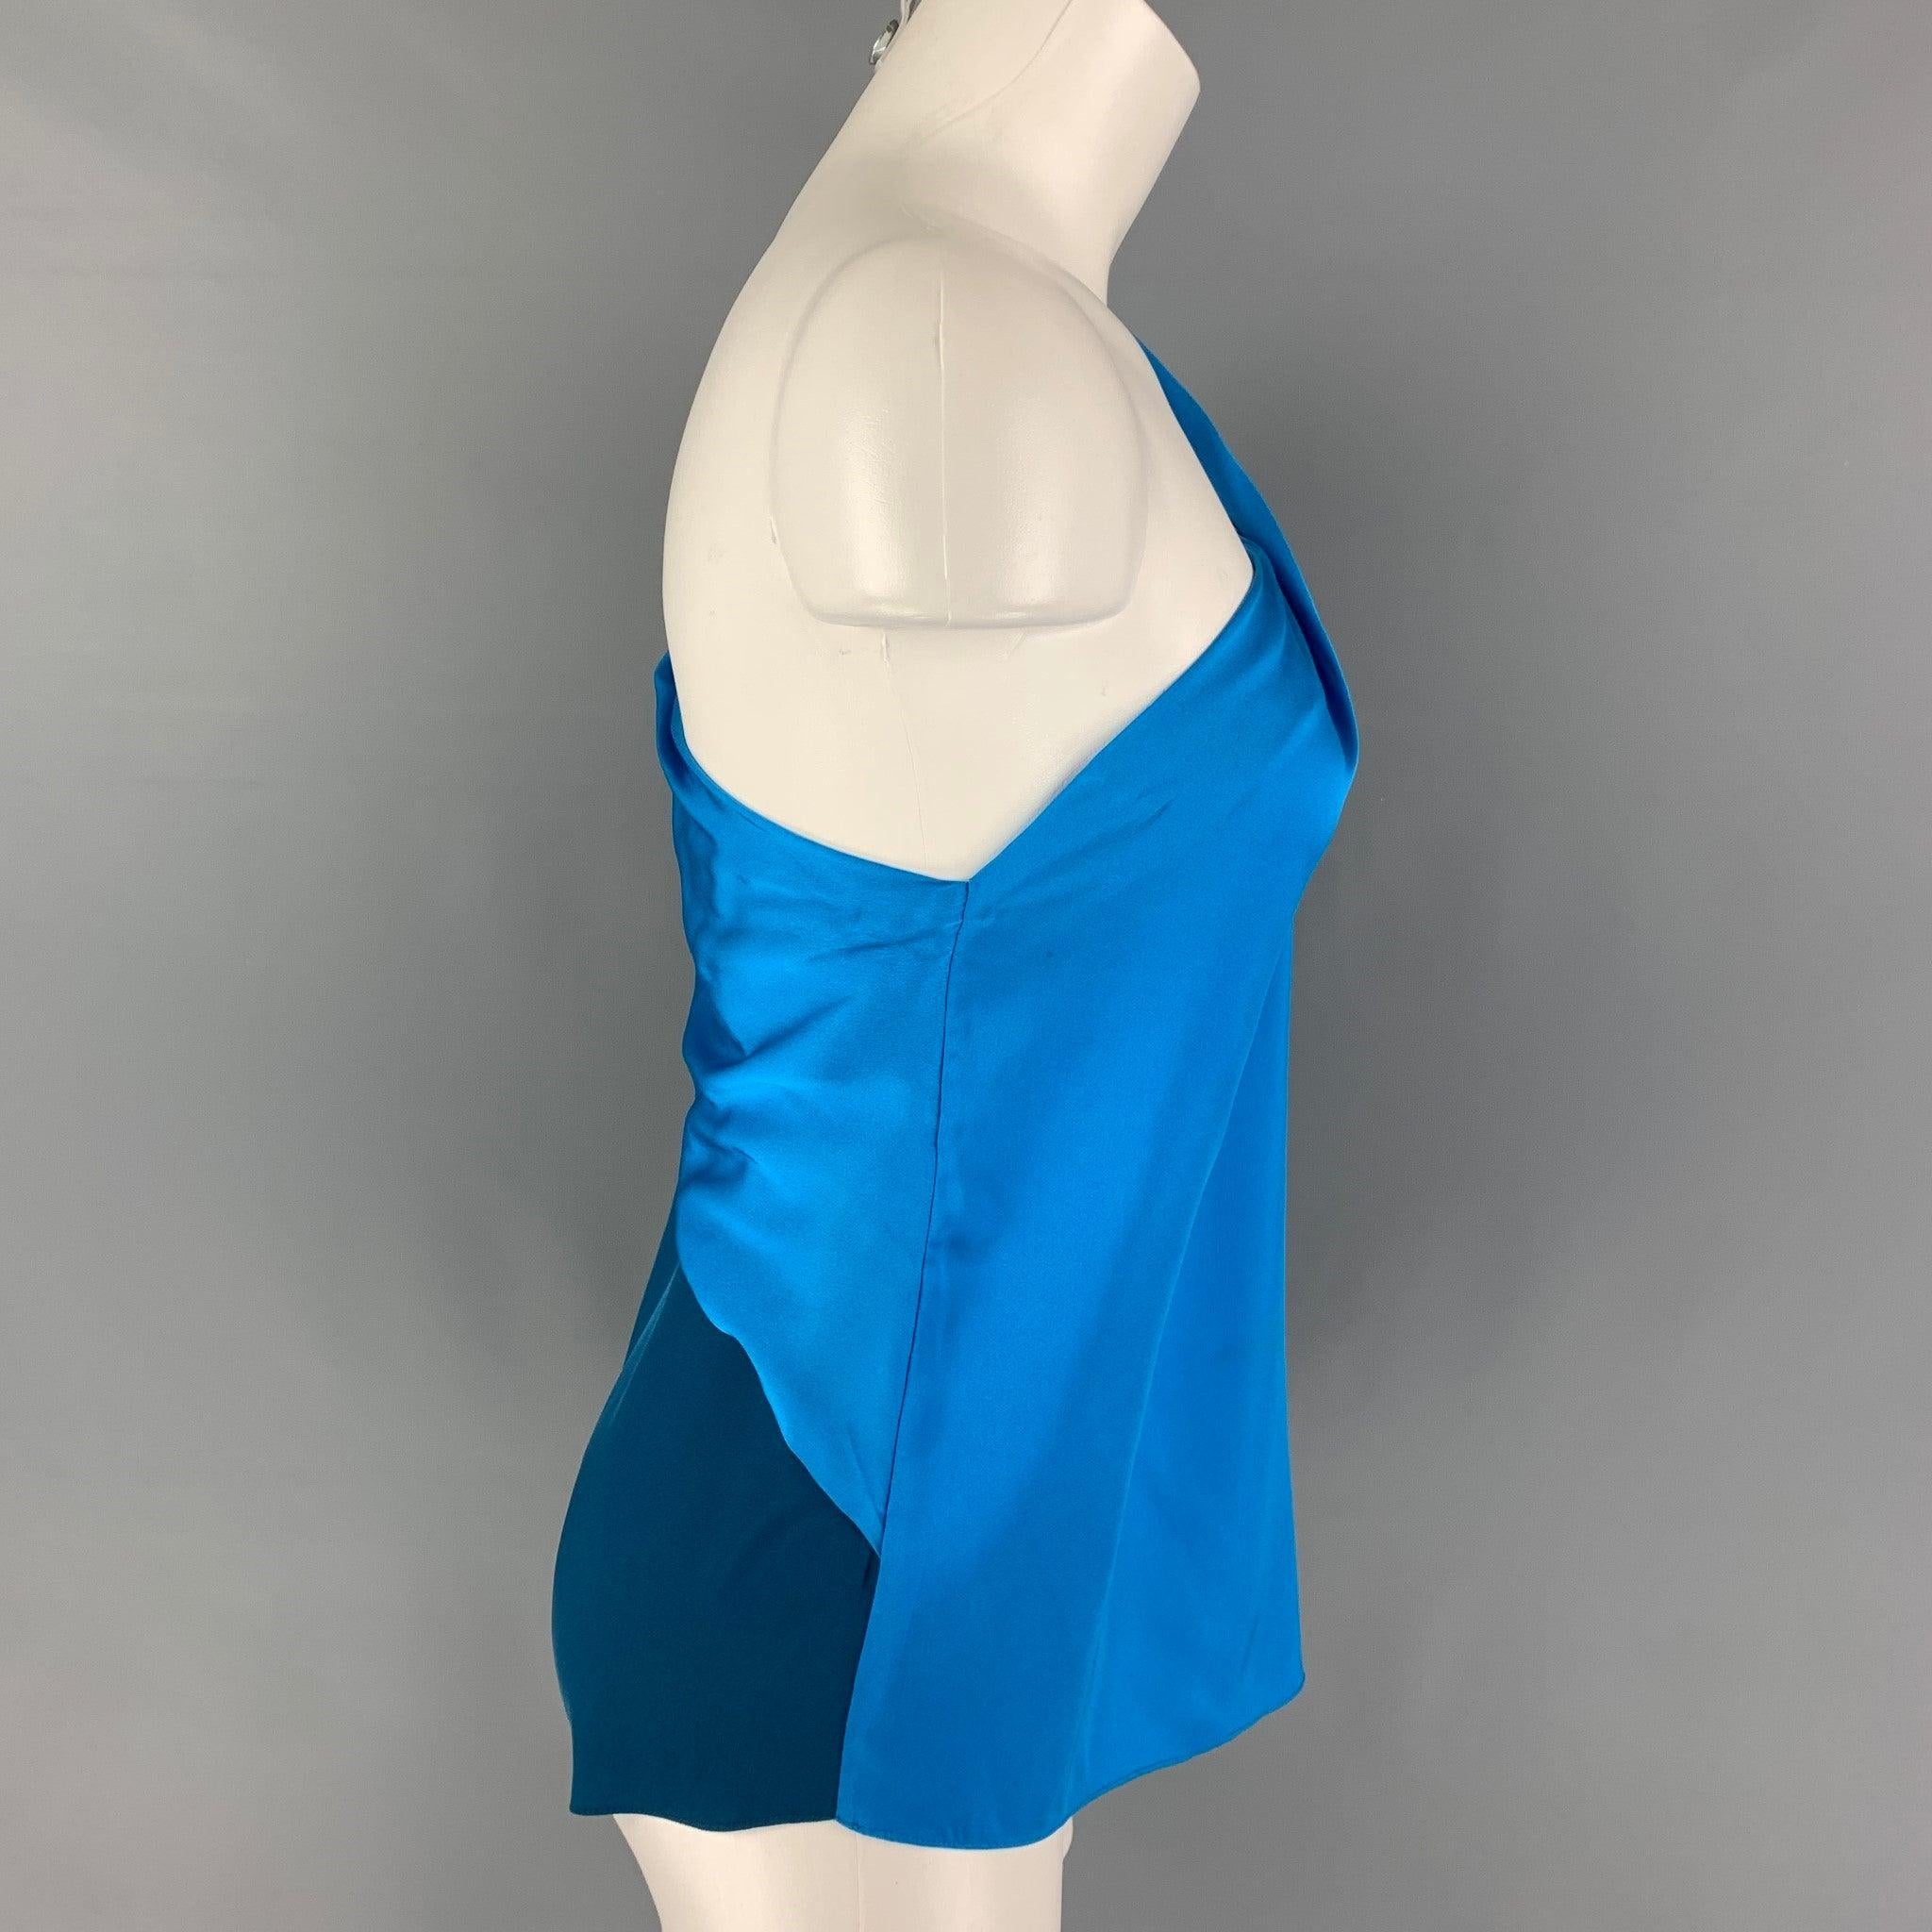 ELIE TAHARI blouse comes in a cobalt & blue two toned silke featuring a one shoulder design, slit sleeve detail, and spaghetti straps.
Good
Pre-Owned Condition. Light wear. As-is.  

Marked:   S 

Measurements: 
  Bust: 33 inches Sleeve: 16.5 inches